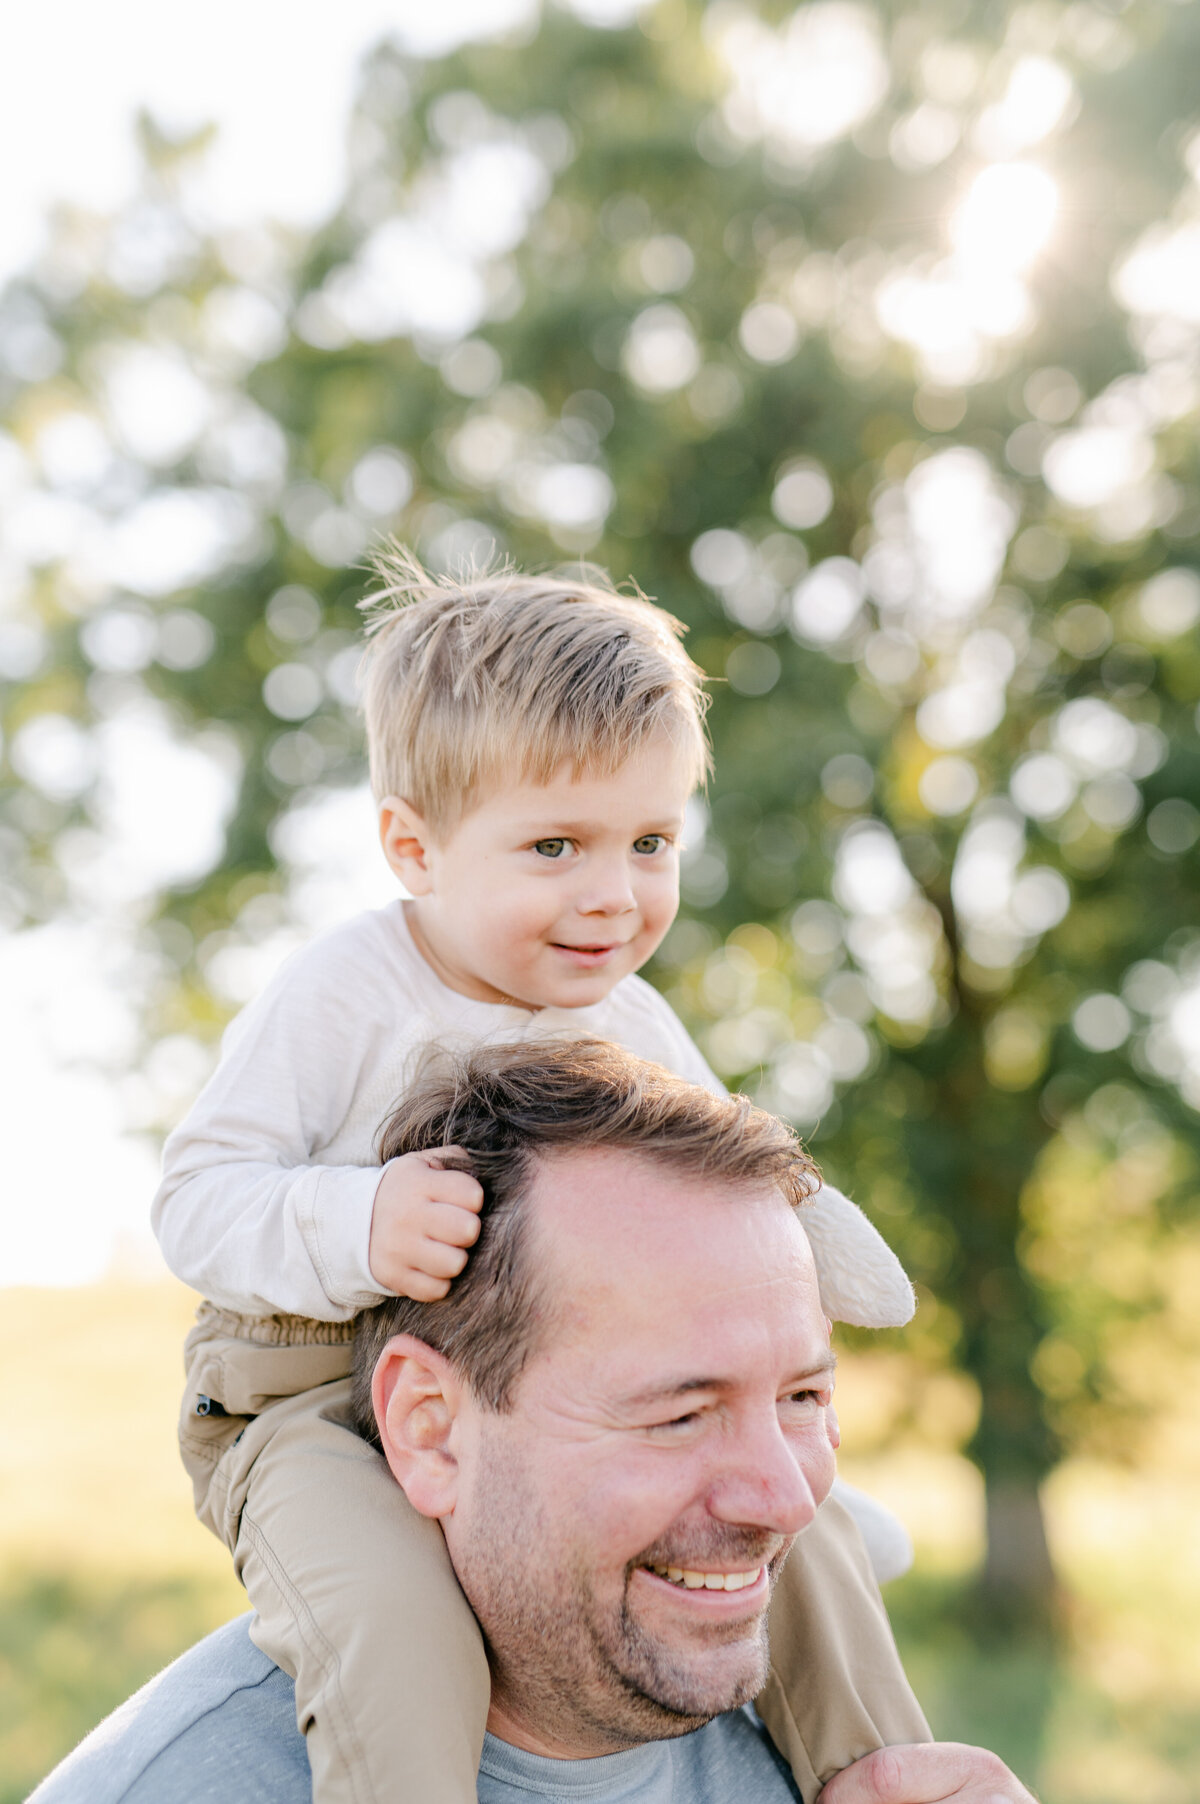 Little boy rides on dad's shoulders while the sun shines in the background